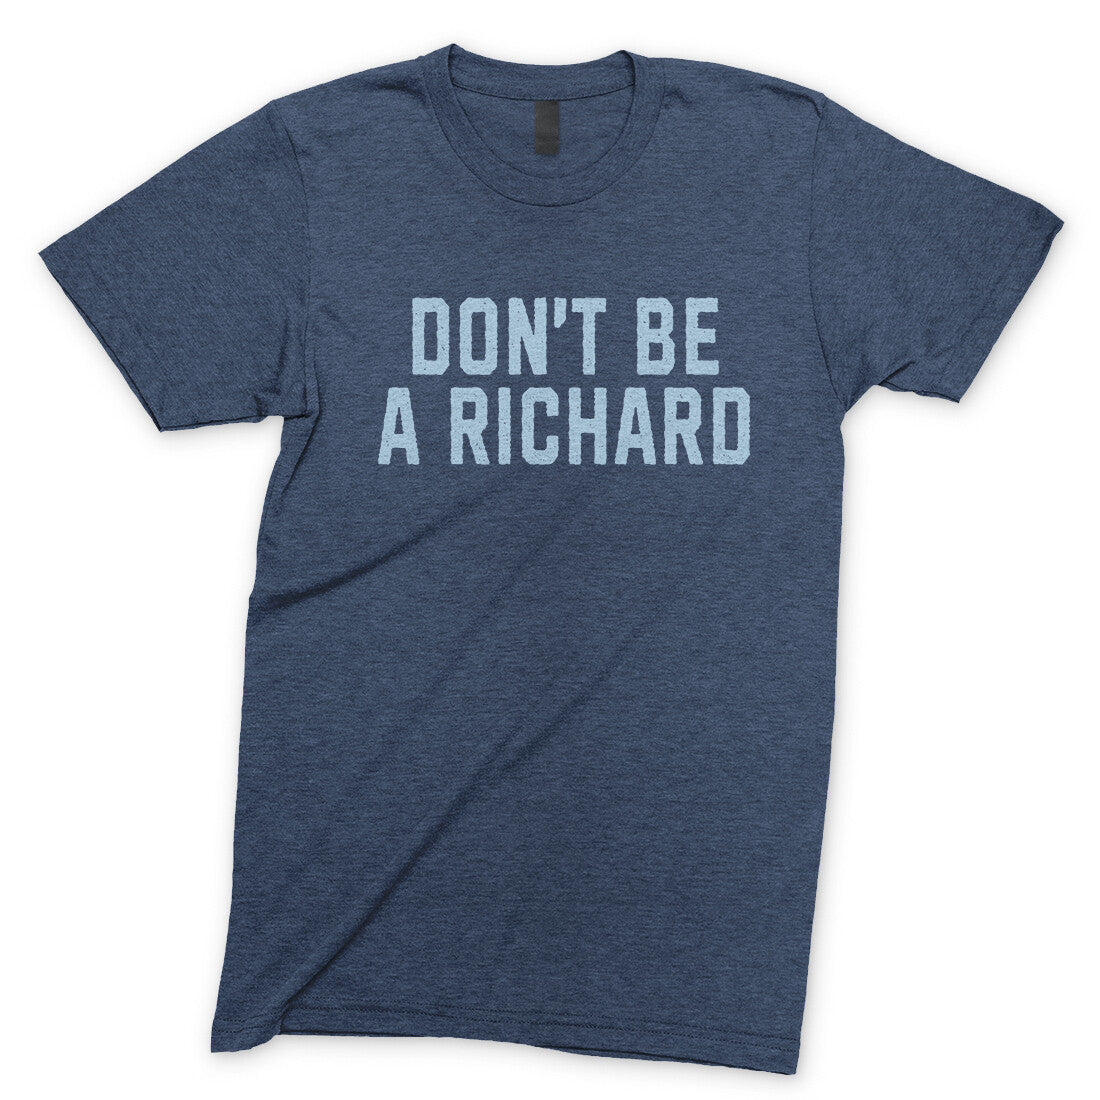 Don't Be a Richard in Navy Heather Color